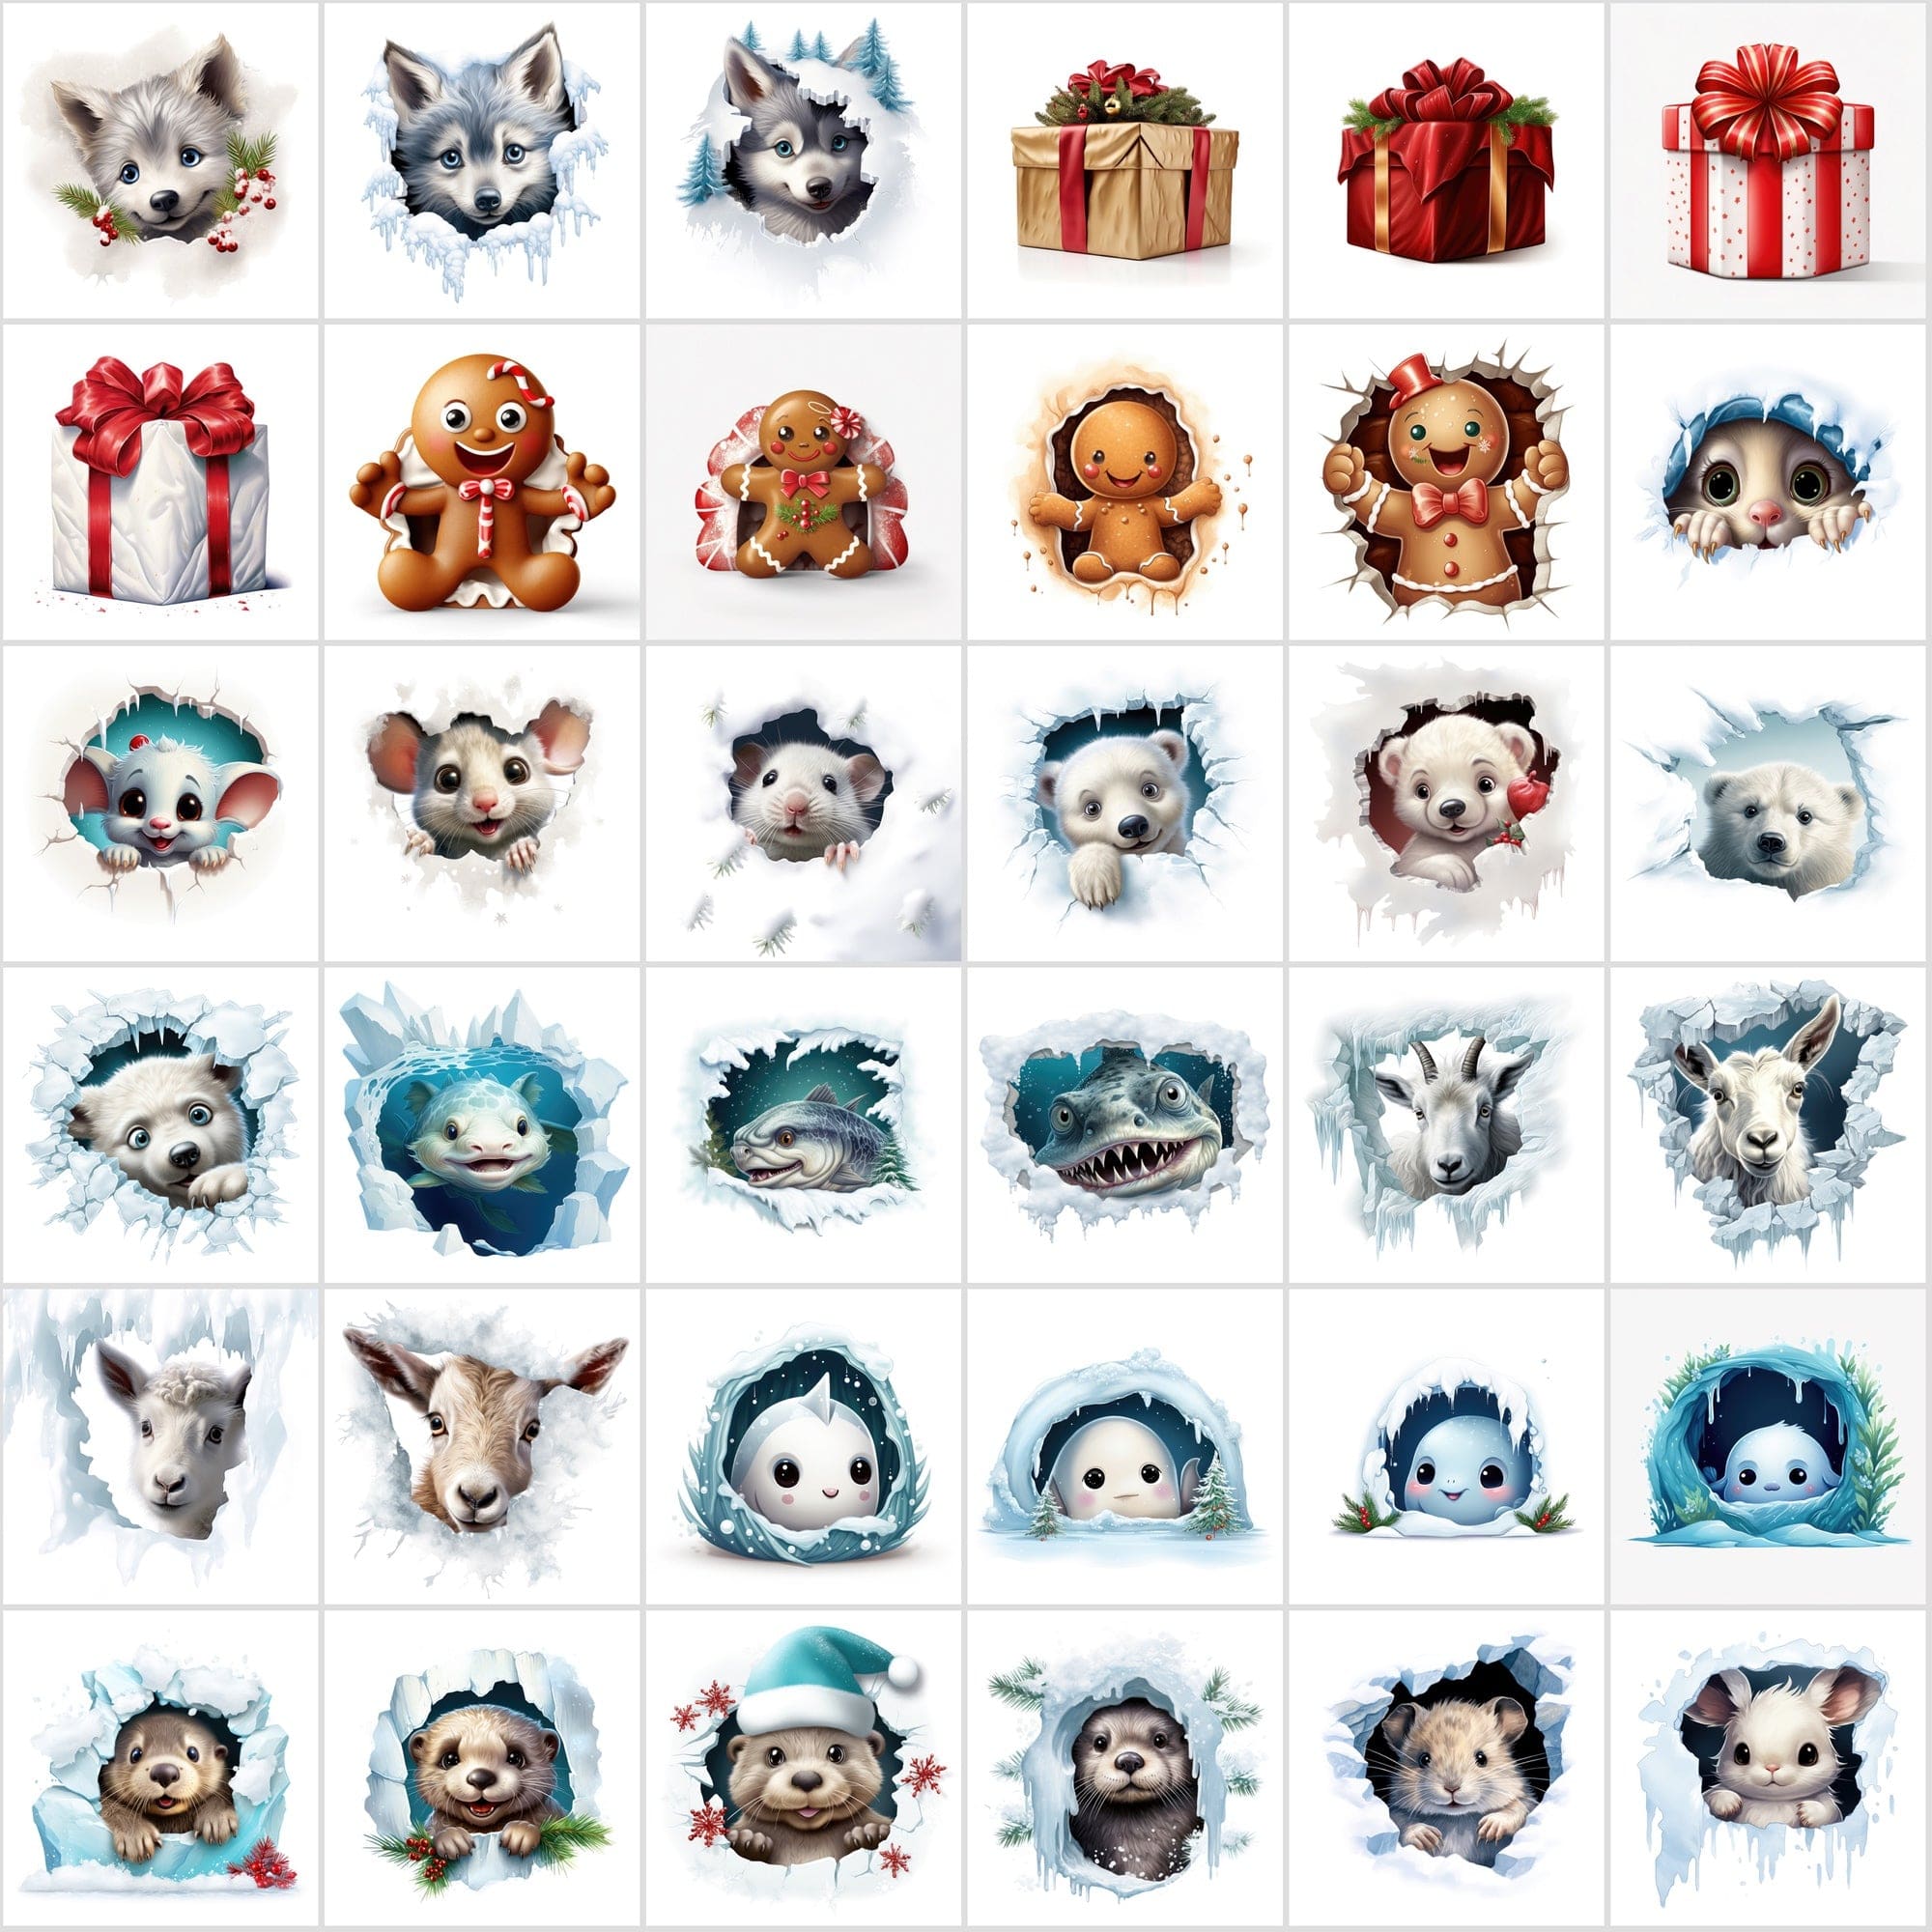 Whimsical Peekaboo Animals in Snow PNG Collection - Vibrant Christmas Themed Digital Images with Commercial Use License Digital Download Sumobundle